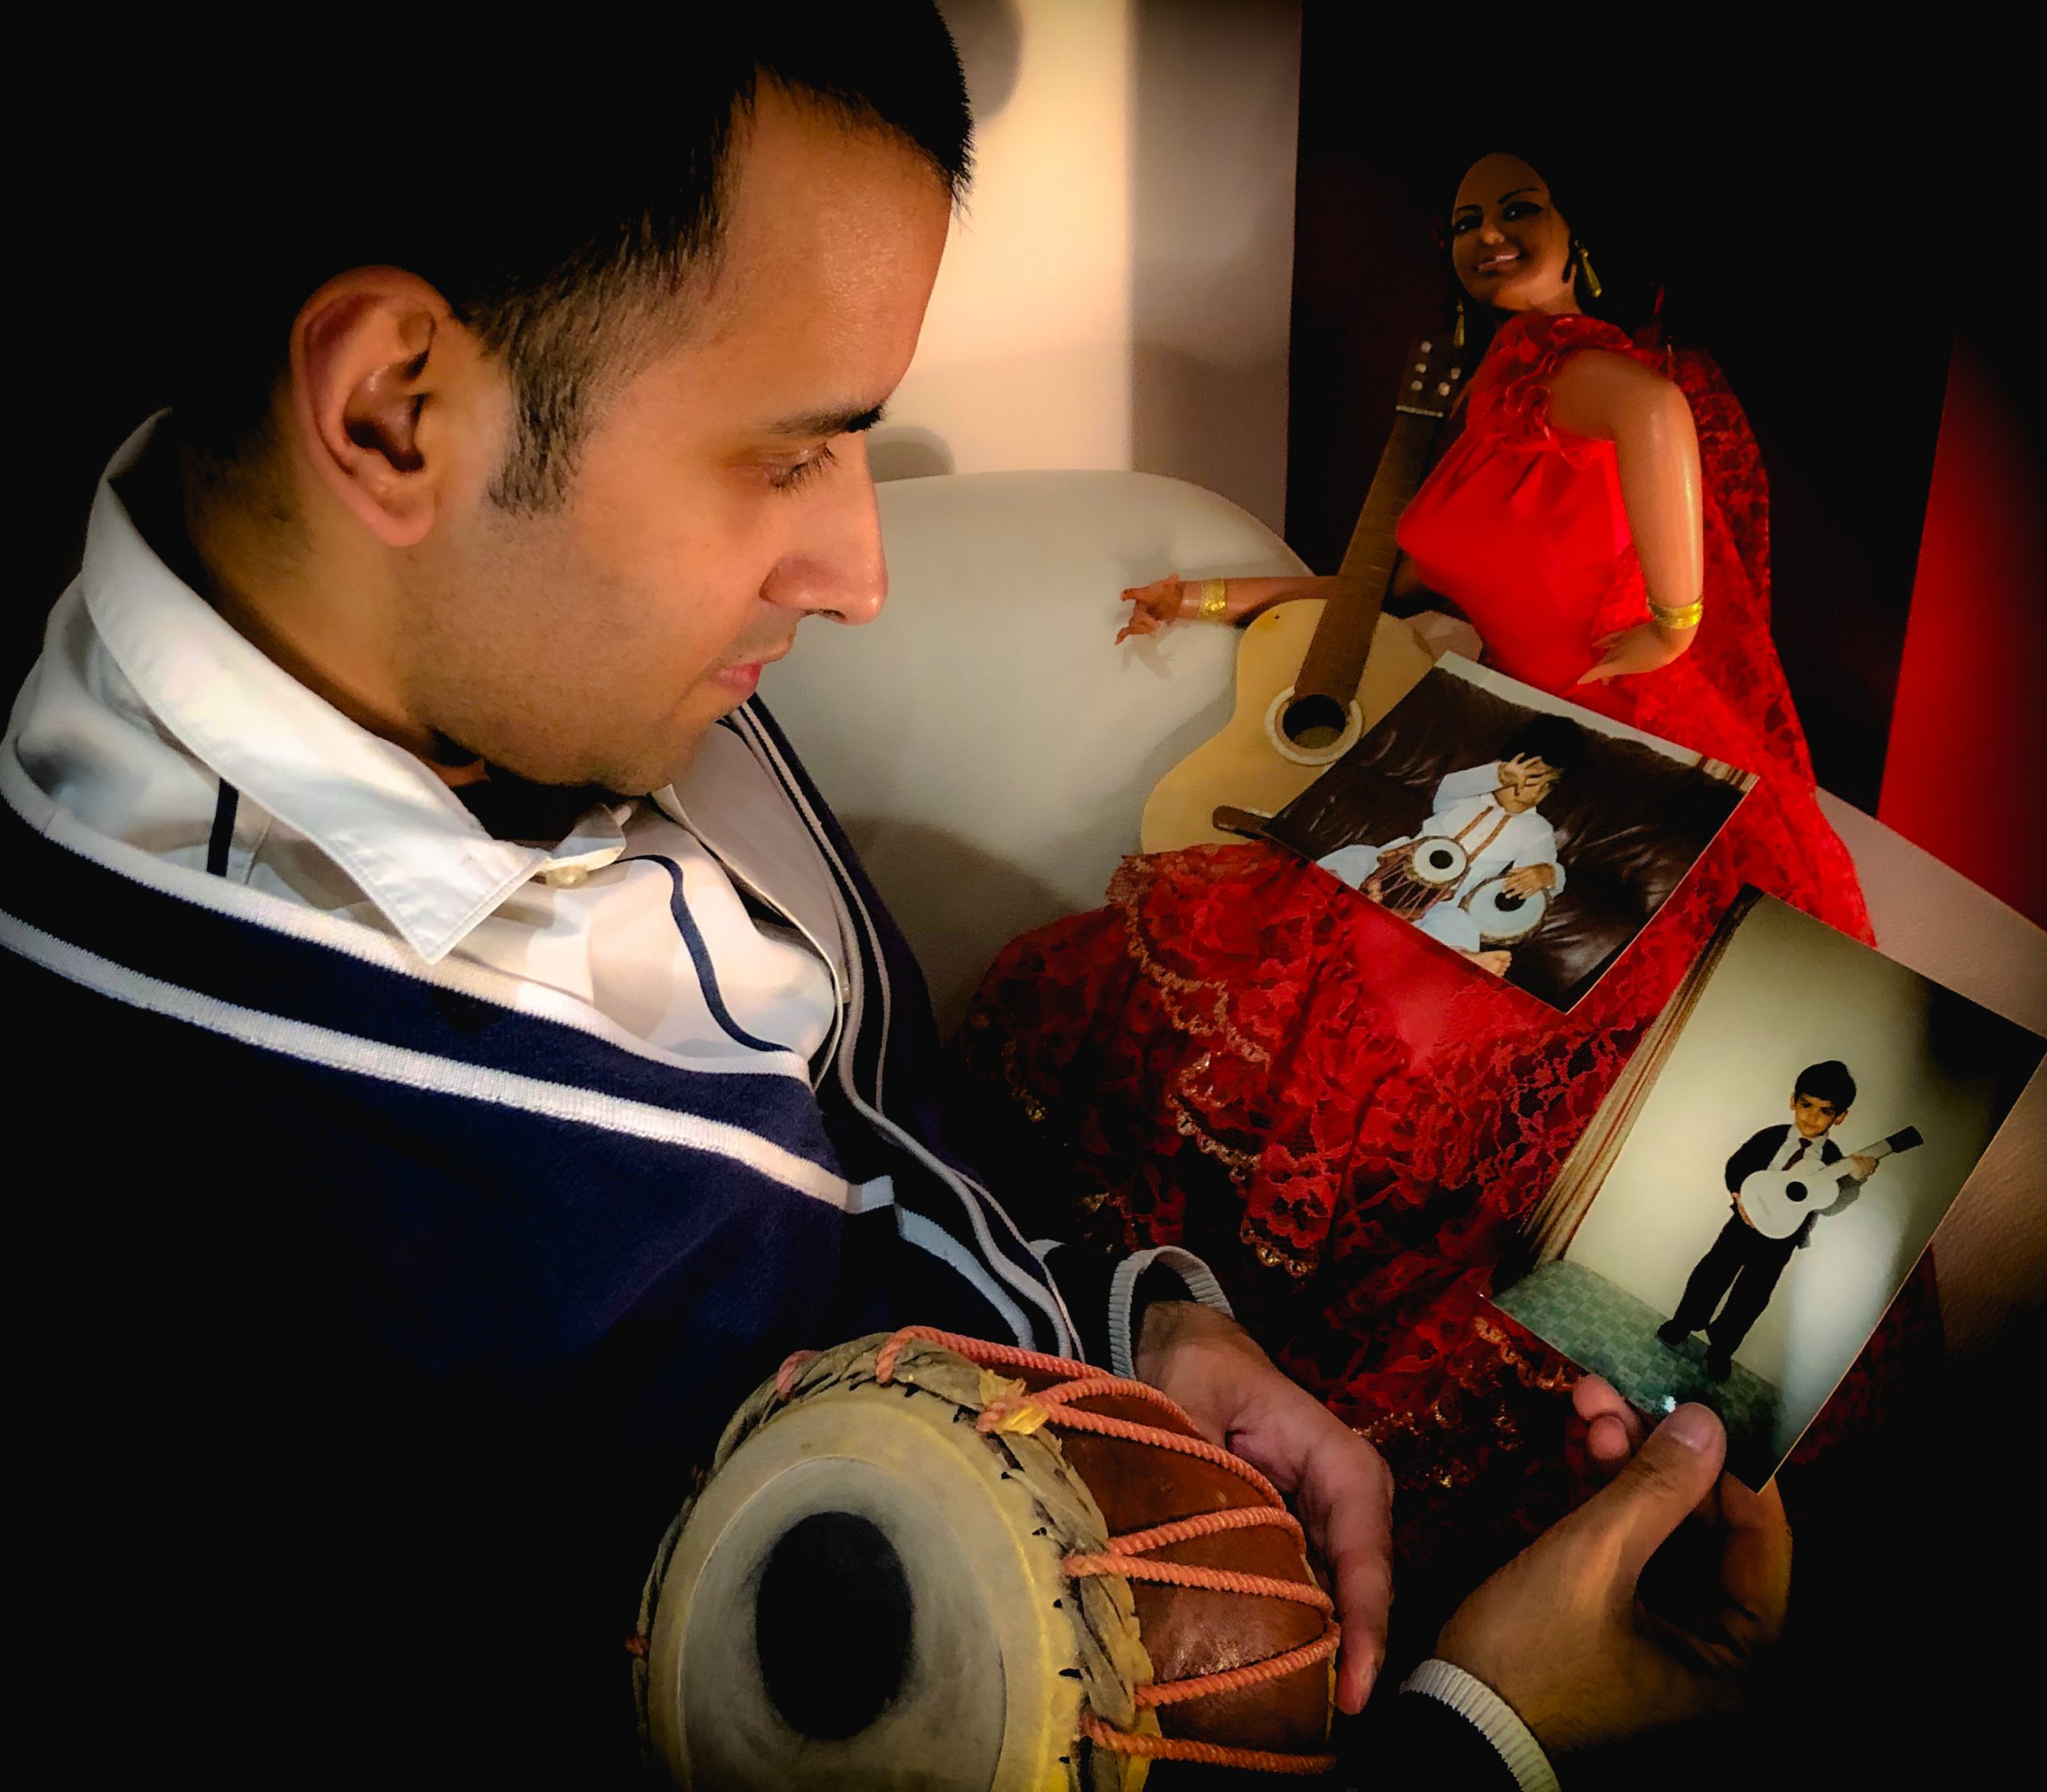 Reminiscing musical instrument memories, childhood memories and old photographs, with a ukulele, tabla (Indian drum) and doll wearing a long red dress, holding a guitar